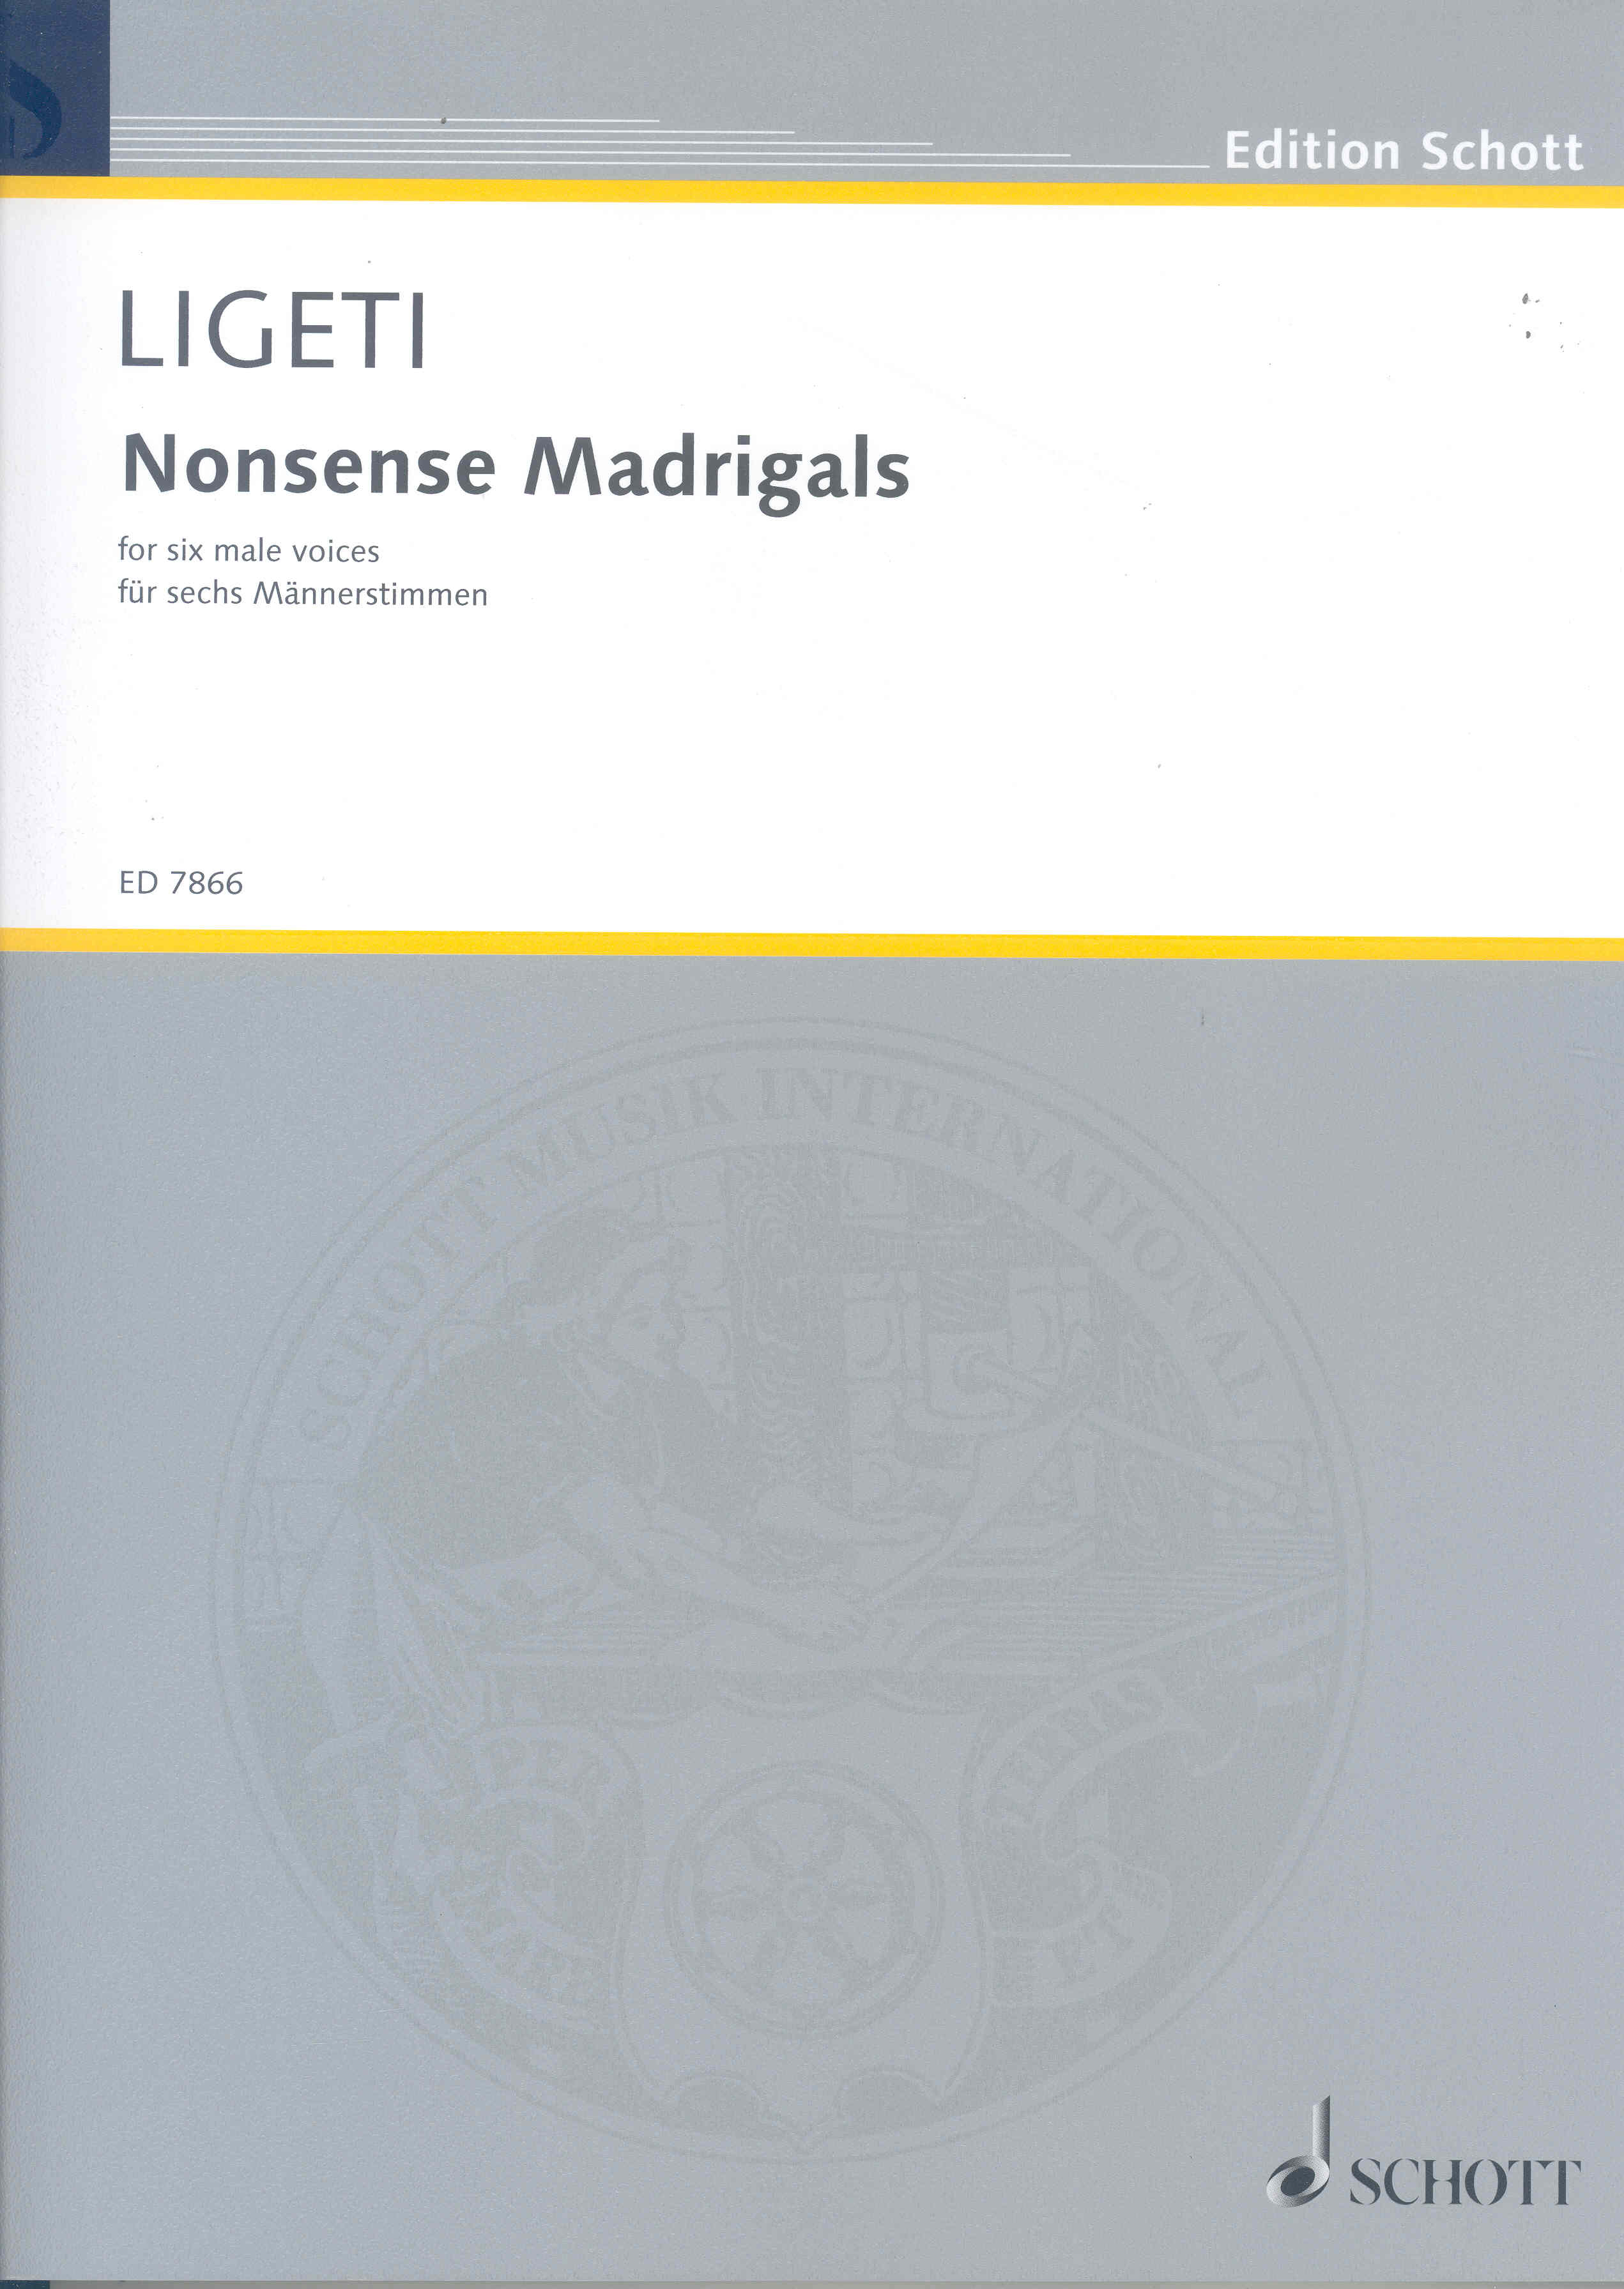 Ligeti Nonsense Madrigals 6 Male Voices Sheet Music Songbook